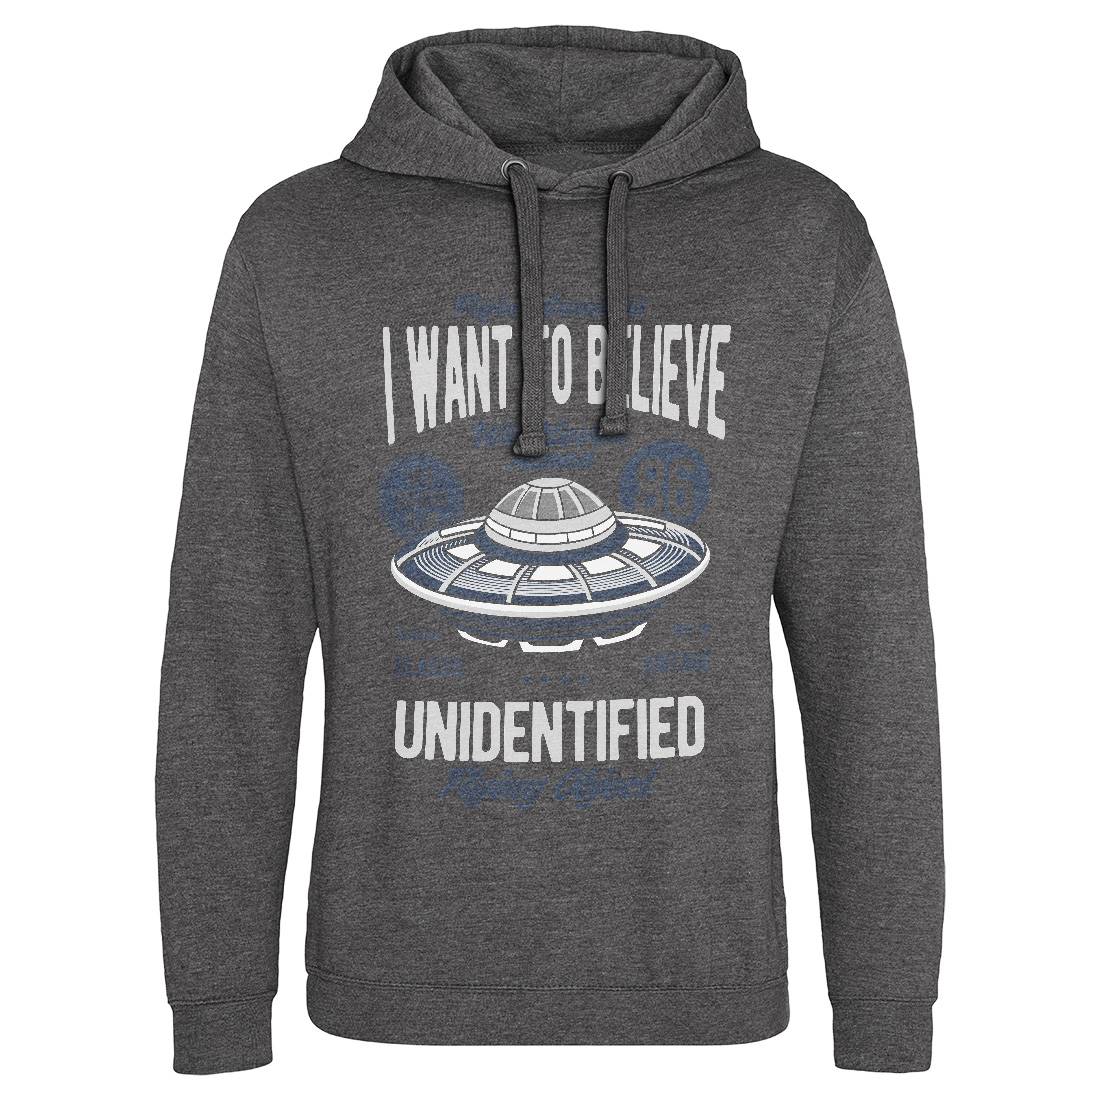 Ufo Mens Hoodie Without Pocket Space C463